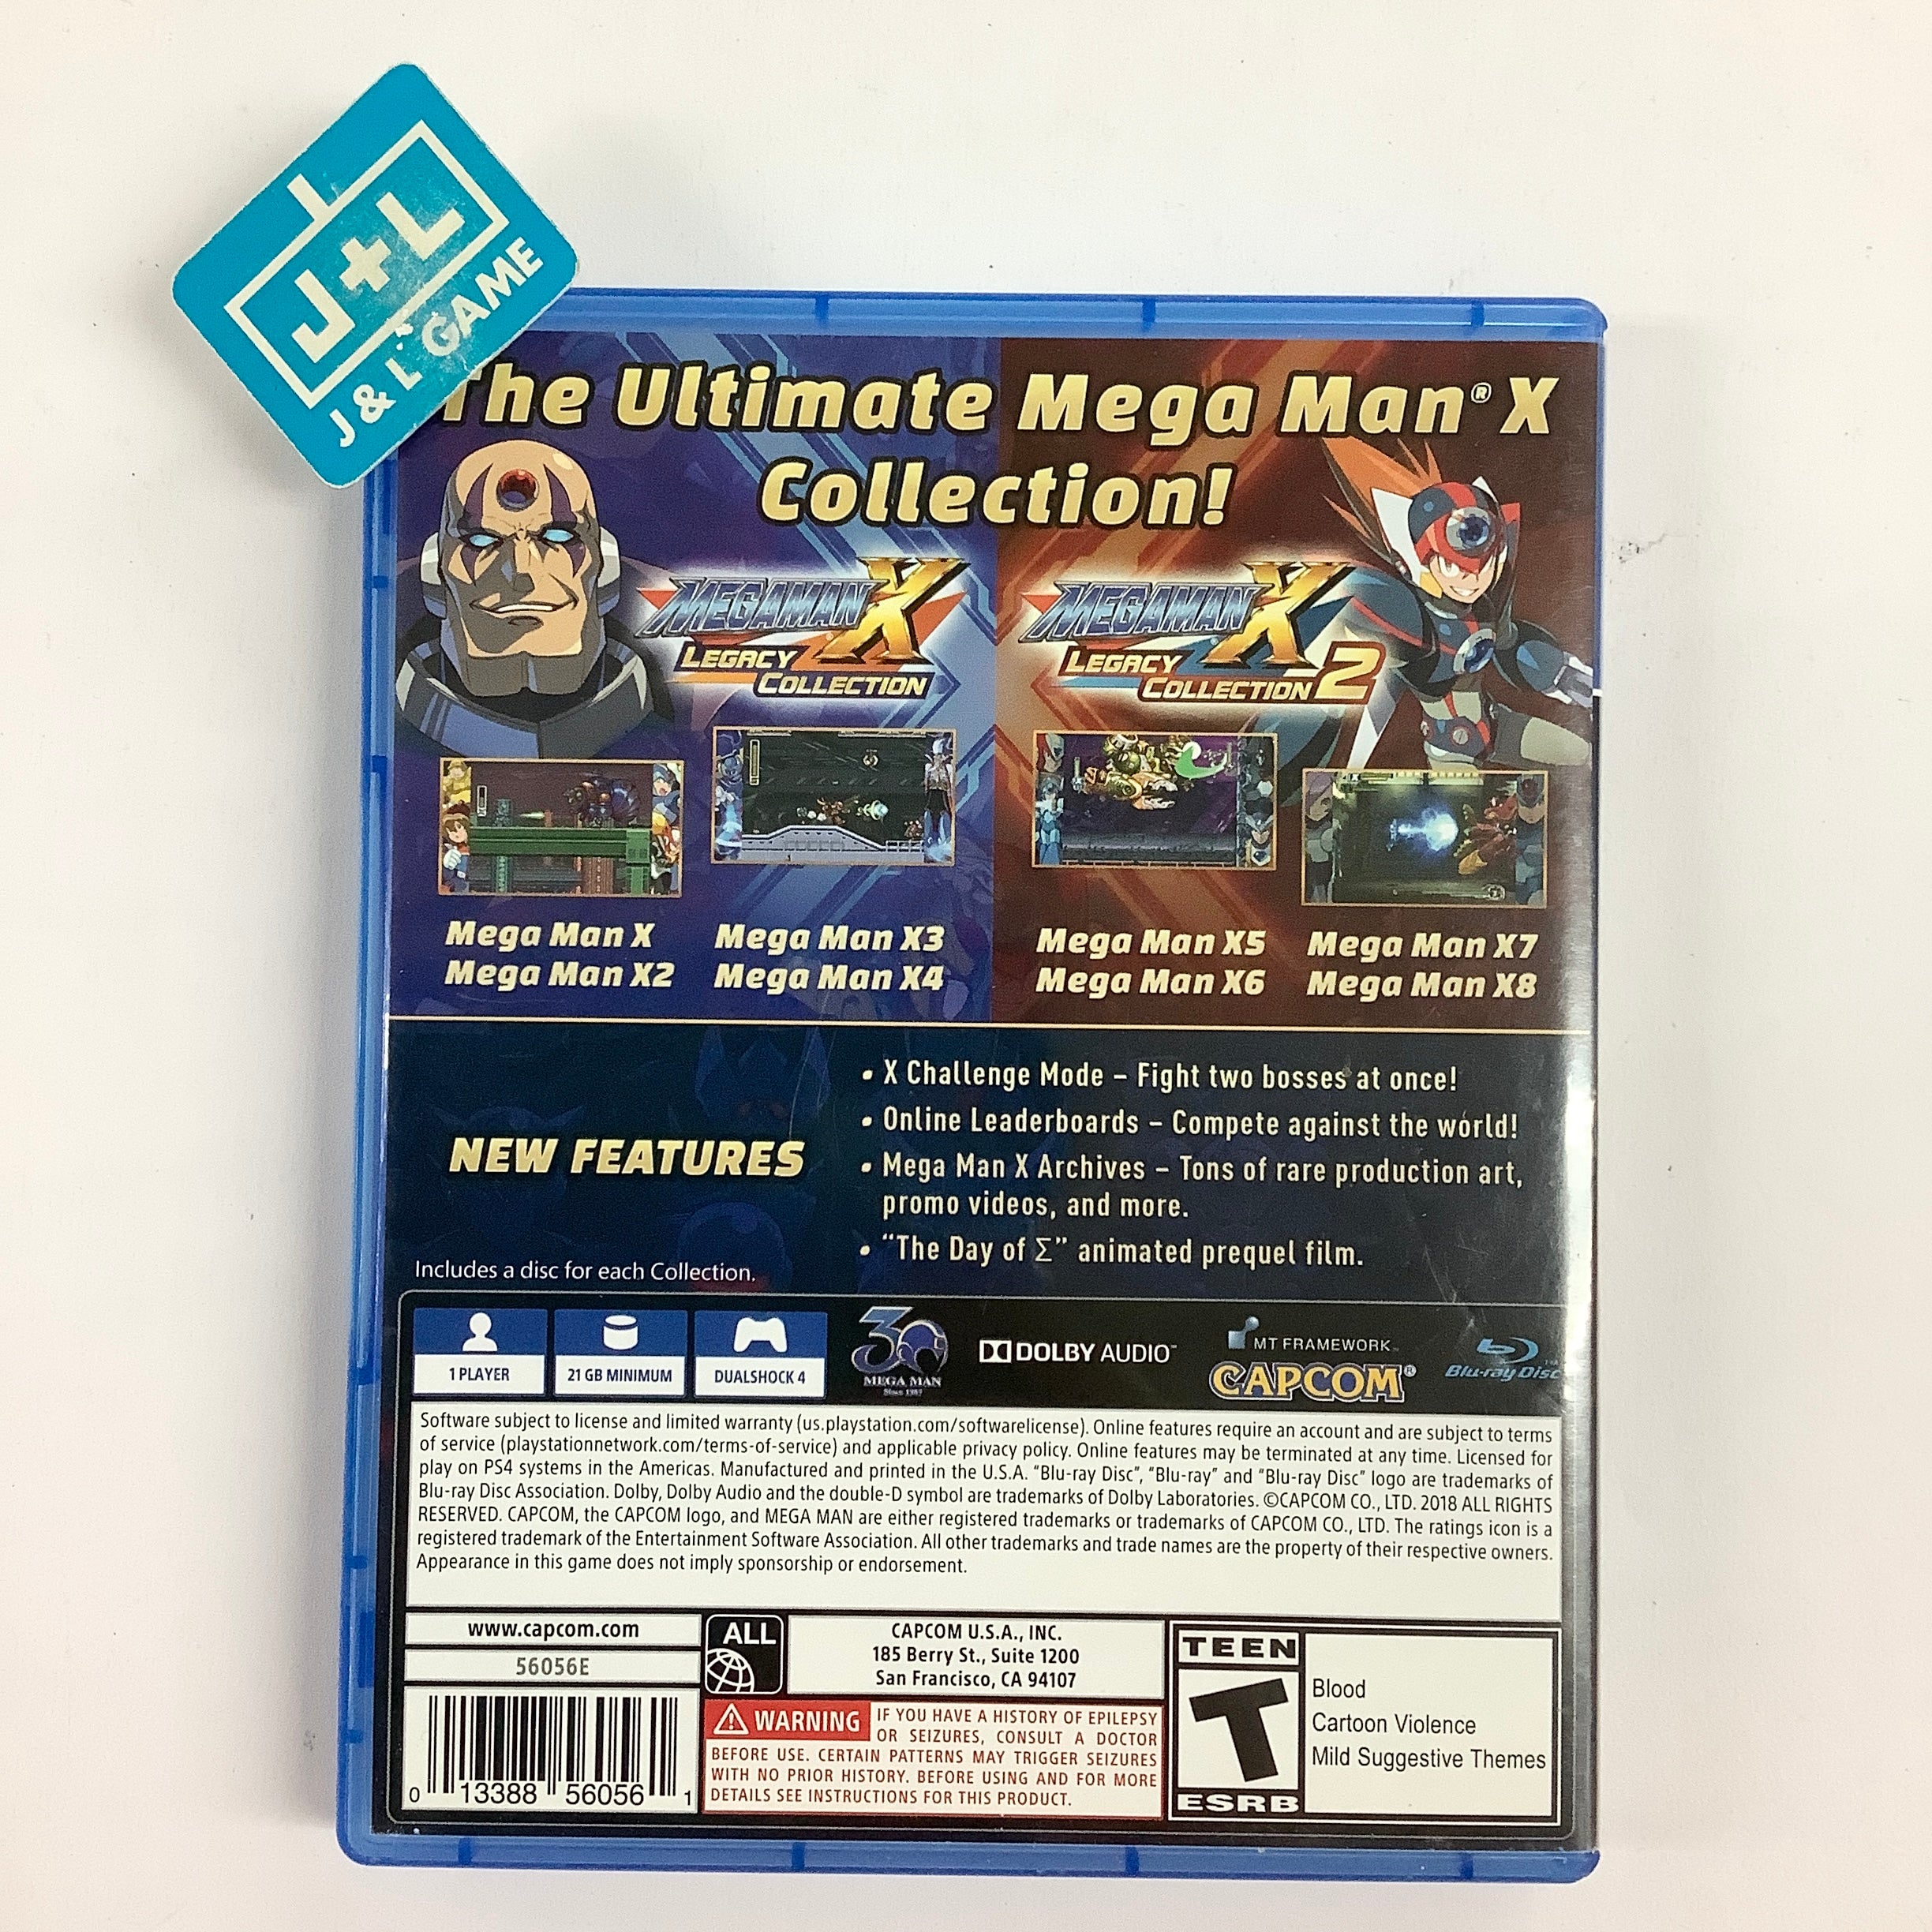 Mega Man X Legacy Collection 1+2 - (PS4)  PlayStation 4 [Pre-Owned] Video Games Capcom   